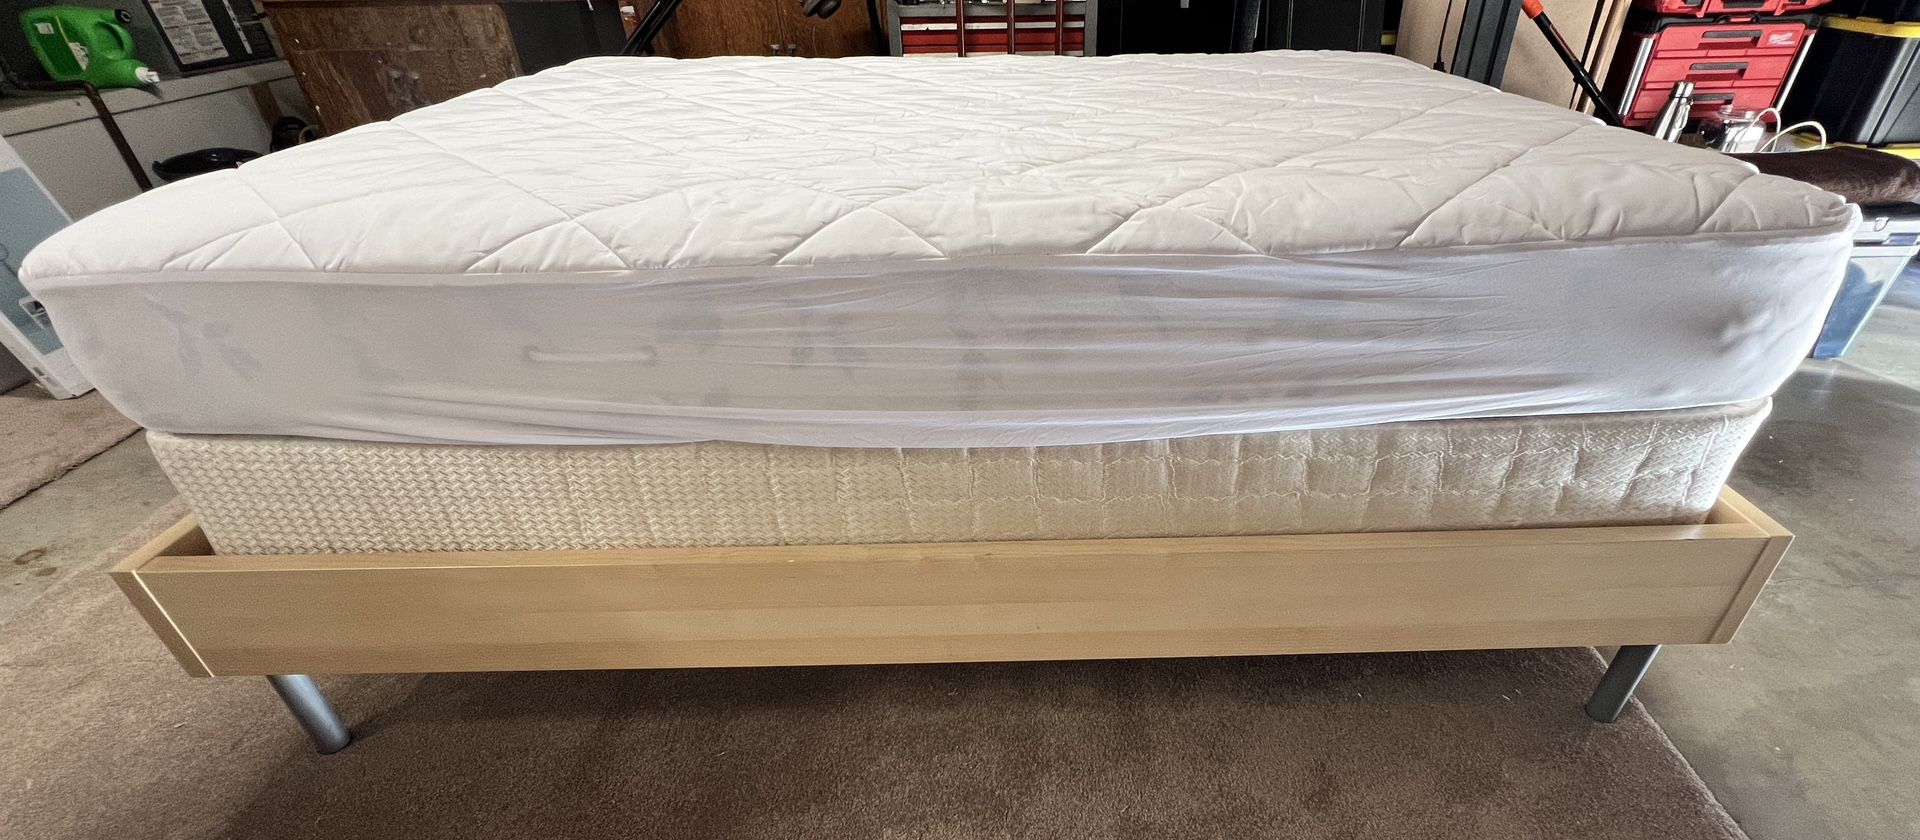 Full Size mattress, Box Spring, And Bed Frame